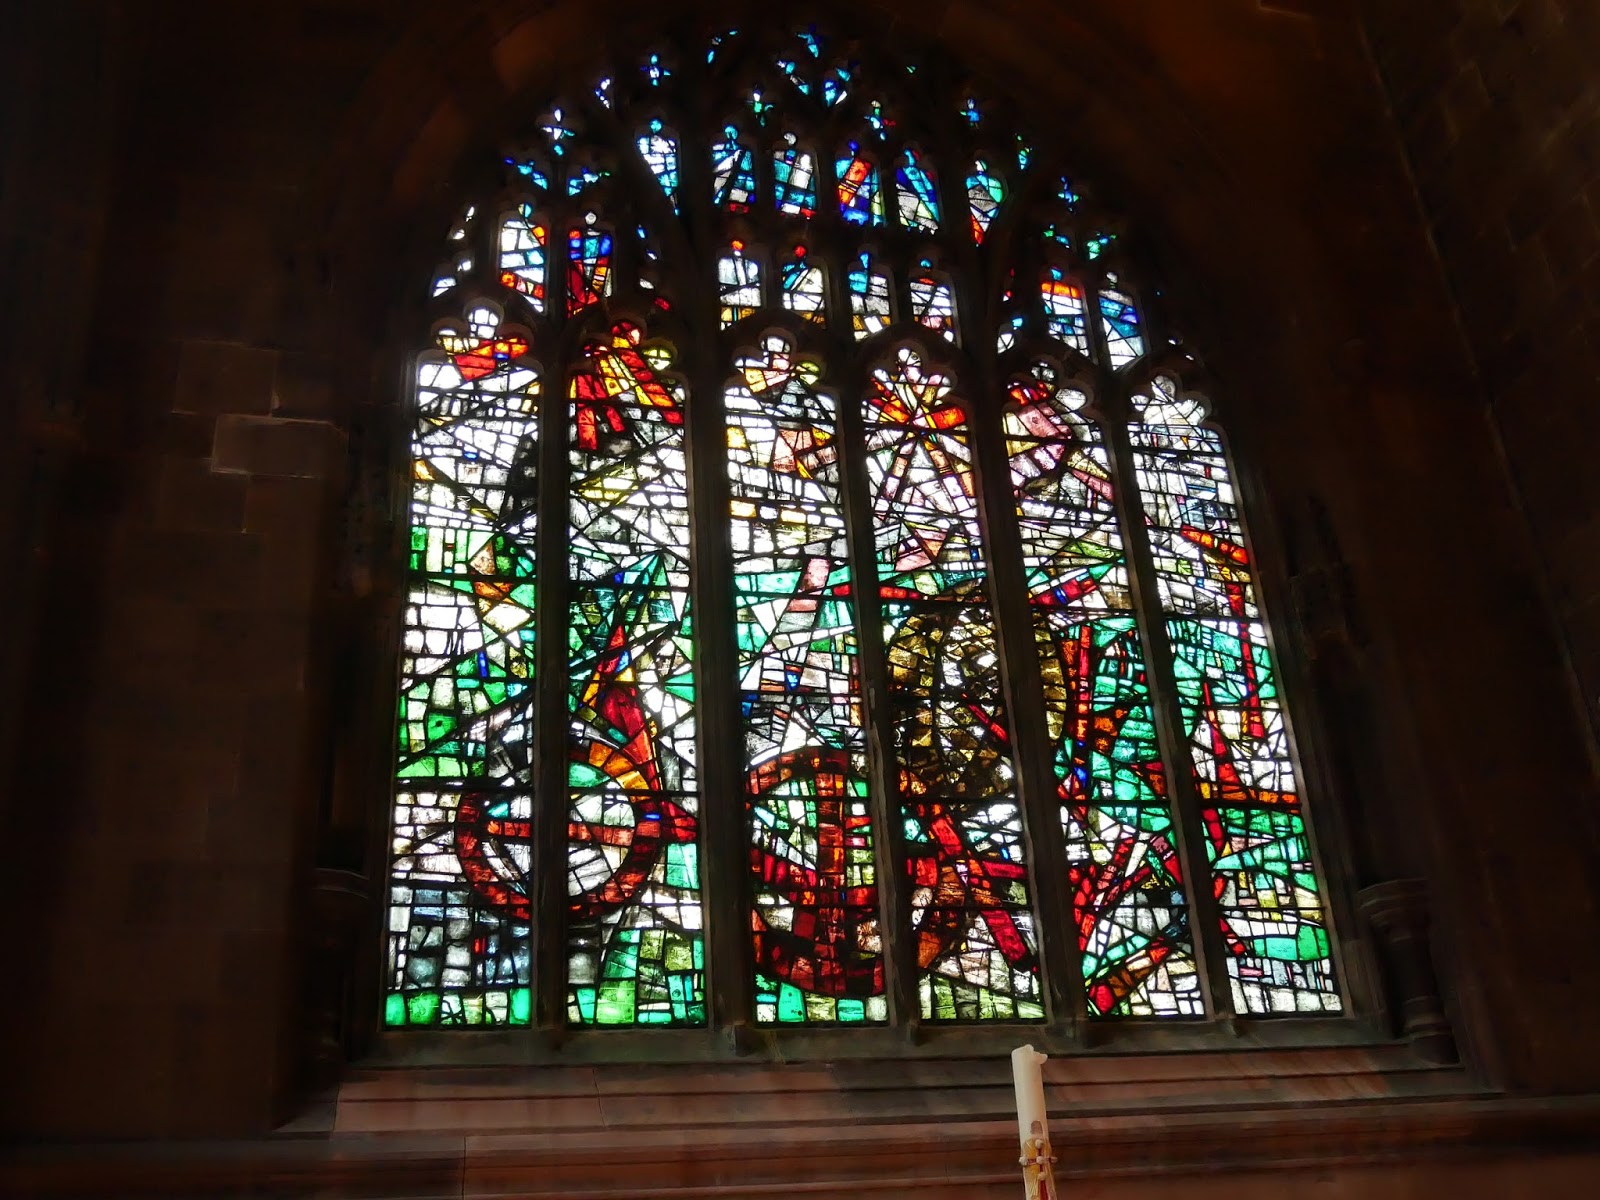 A stained glass window at Manchester Cathedral - Lumix GX80